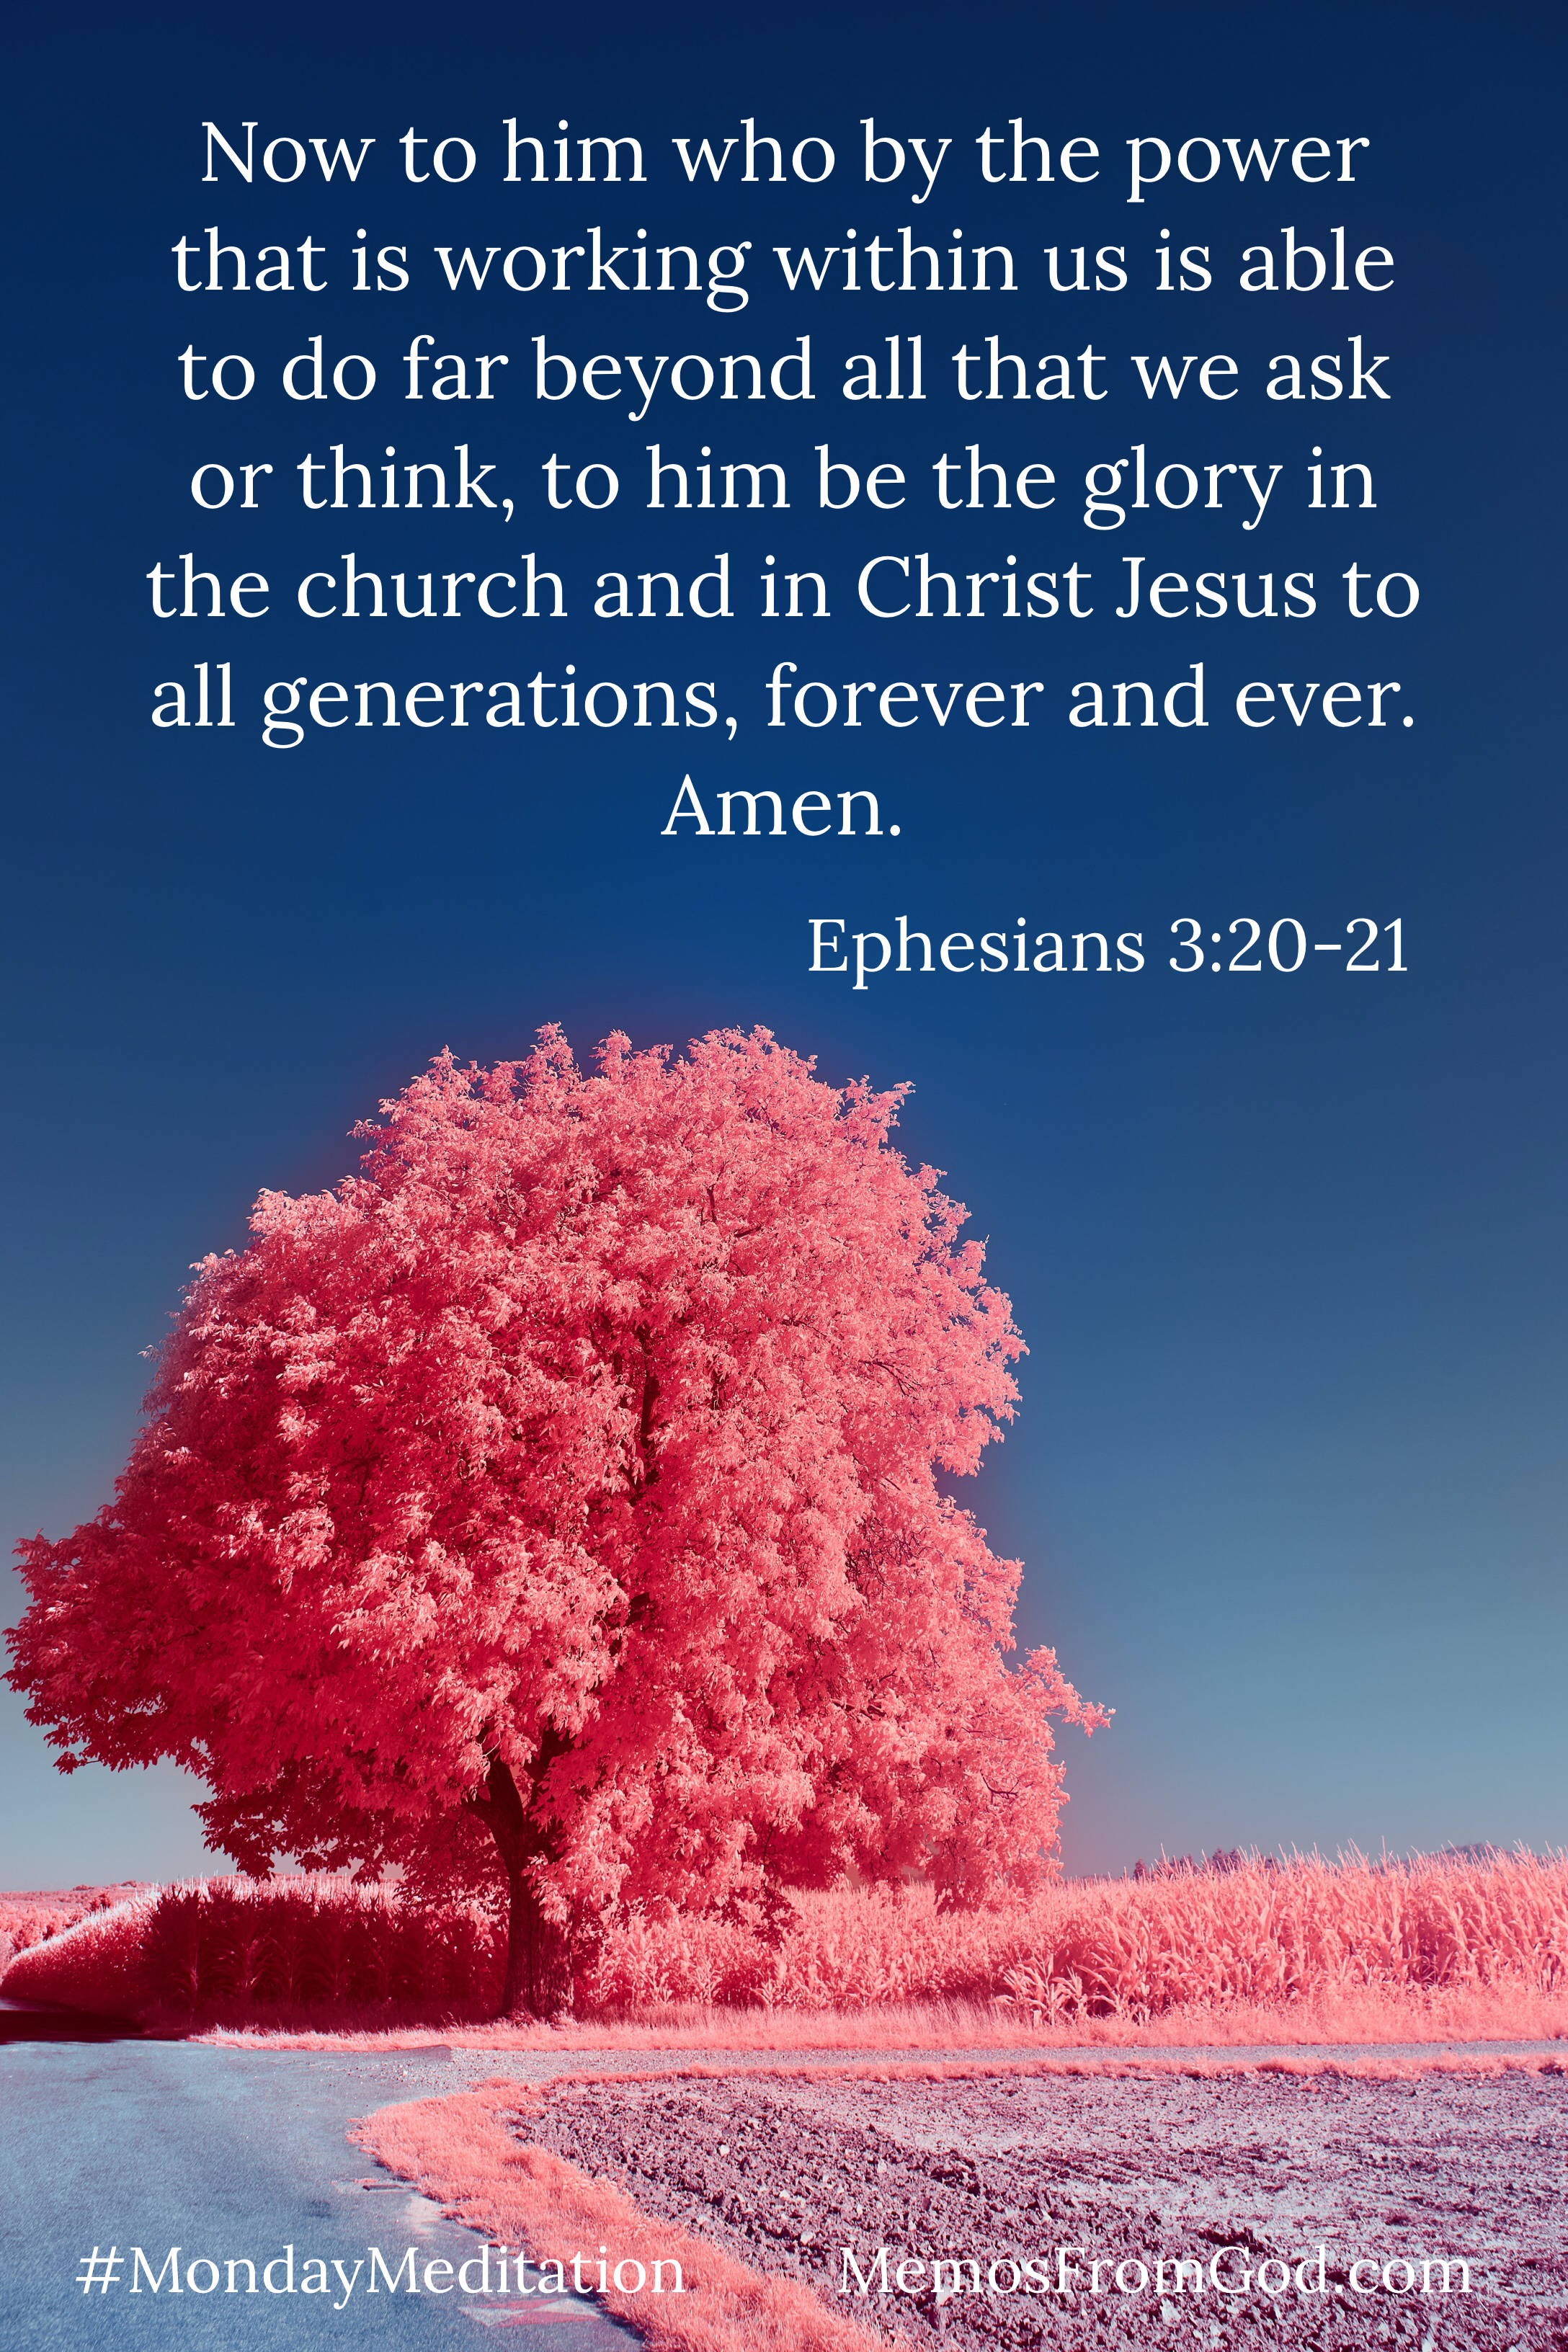 A lone tree, fully loaded with leaves, on the edge of a field. Both the tree and the field are coloured a bright pink. There is a deep blue sky in the background. Caption: Now to him who by the power that is working within us is able to do far beyond all that we ask or think, to him be the glory in the church and in Christ Jesus to all generations, forever and ever. Amen. Ephesians 3:20-21